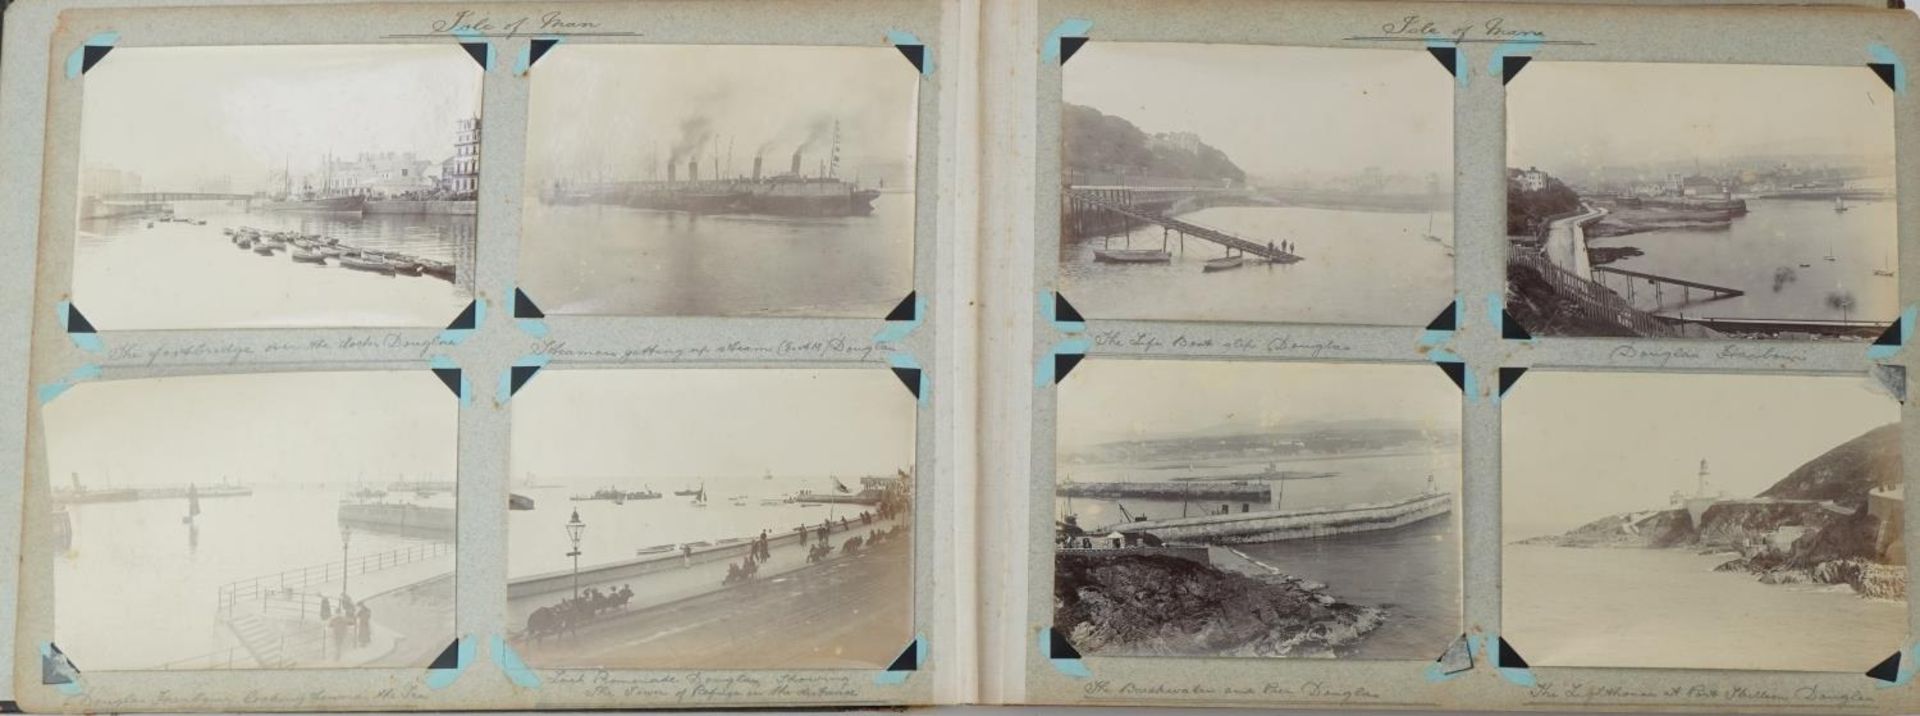 Early 20th century black and white photographs relating to the Isle of Man arranged in an album - Image 3 of 28